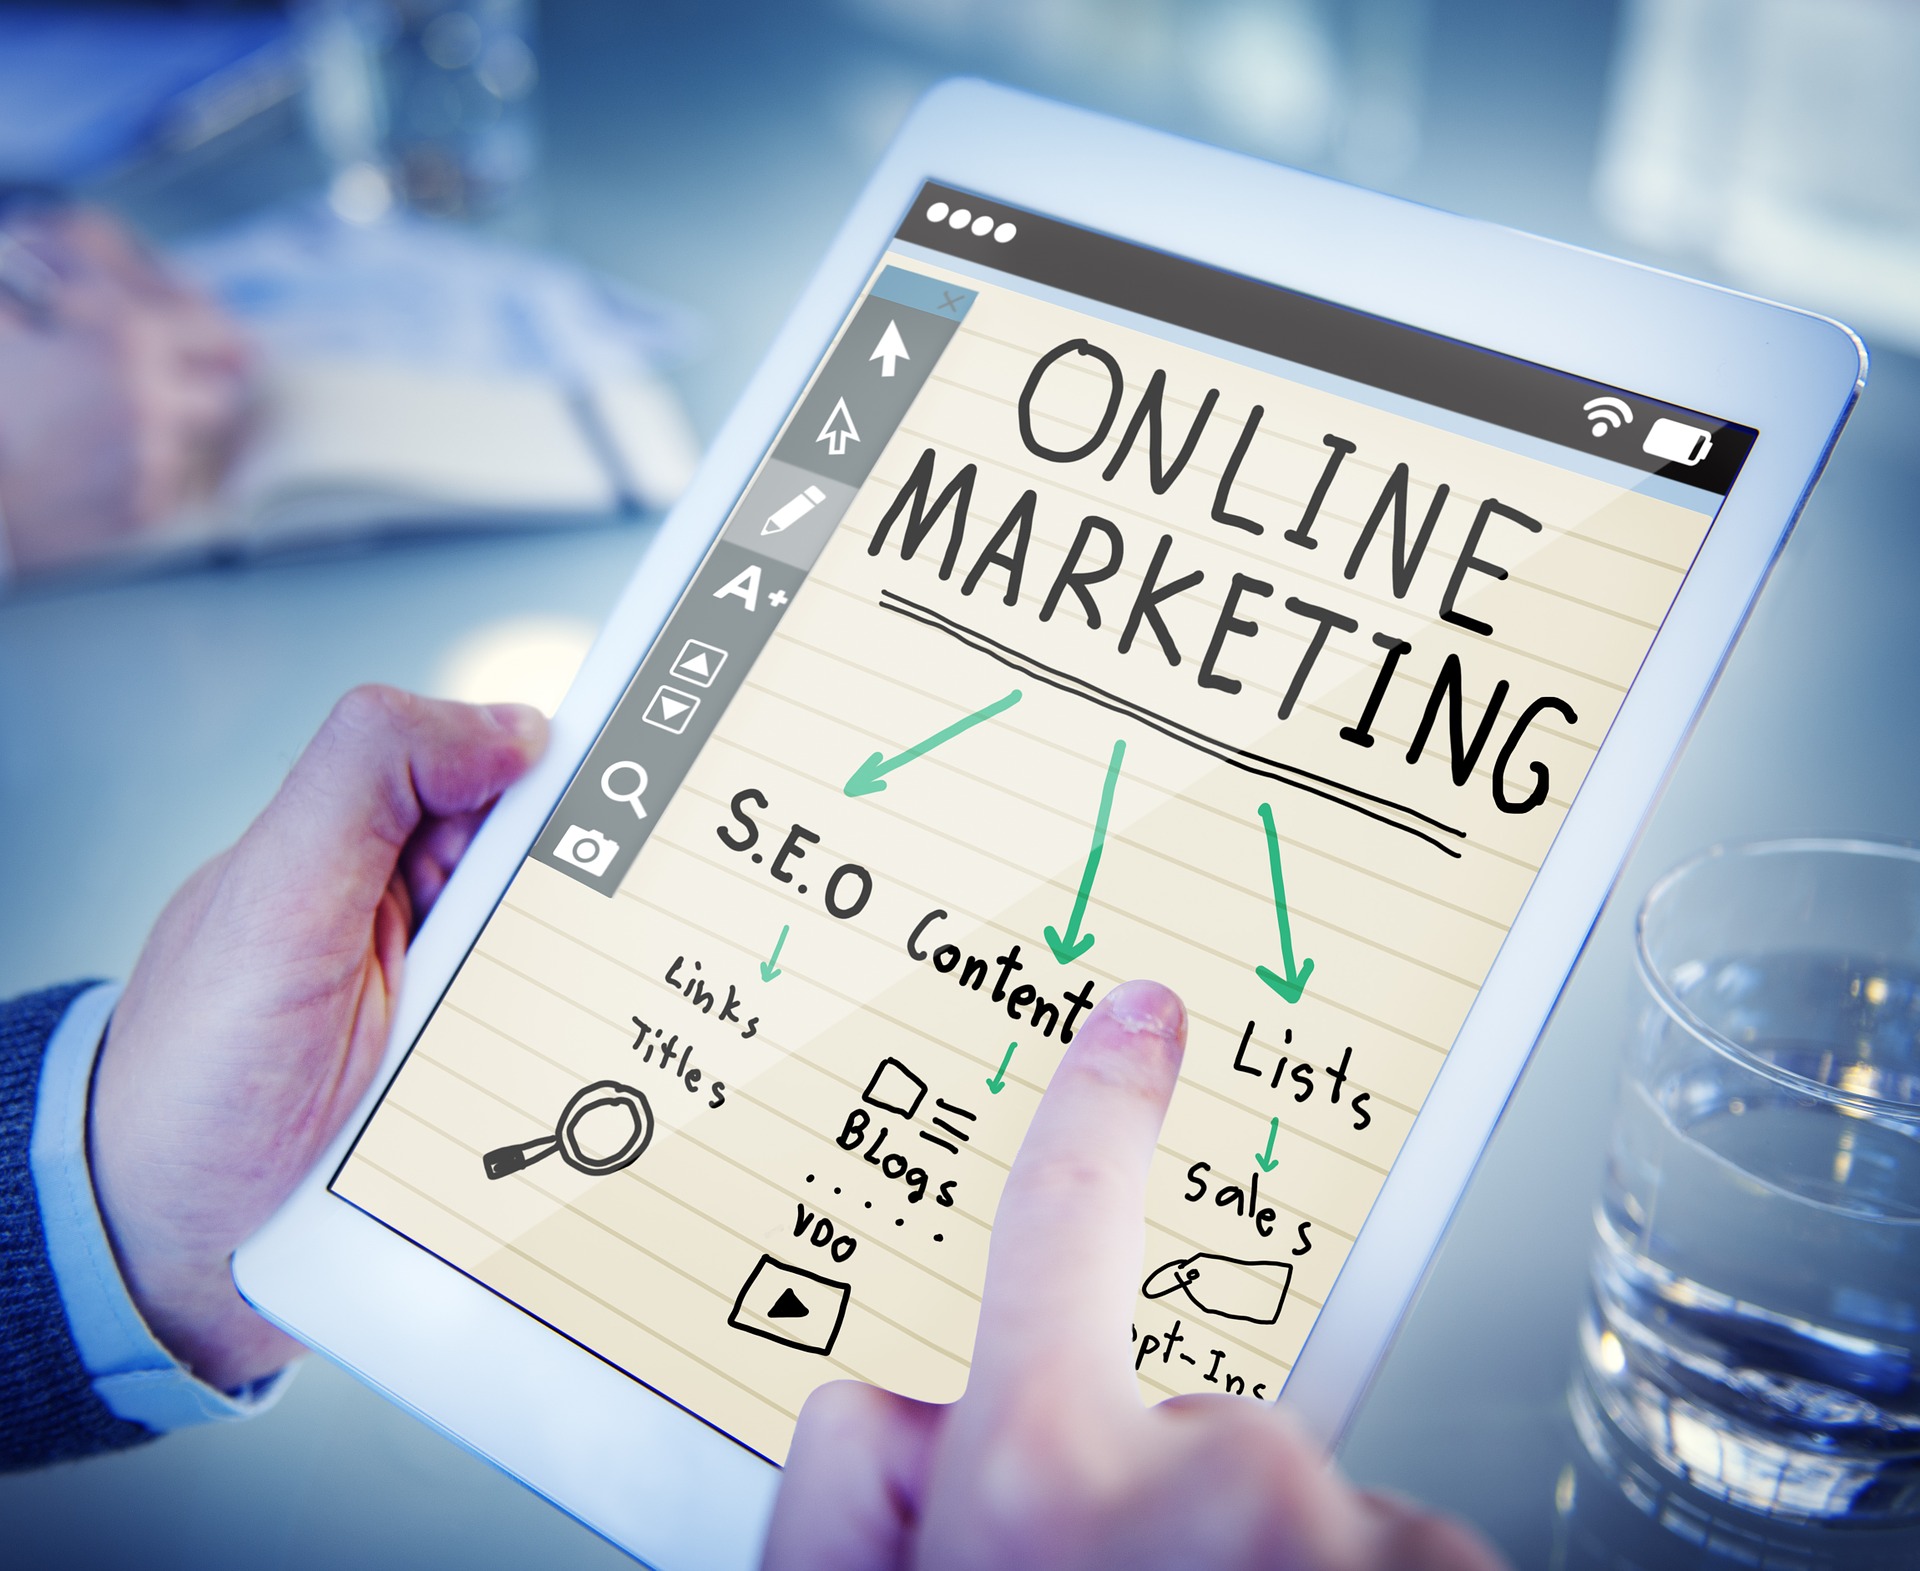 Online Marketing And Using Awesome CTA’s